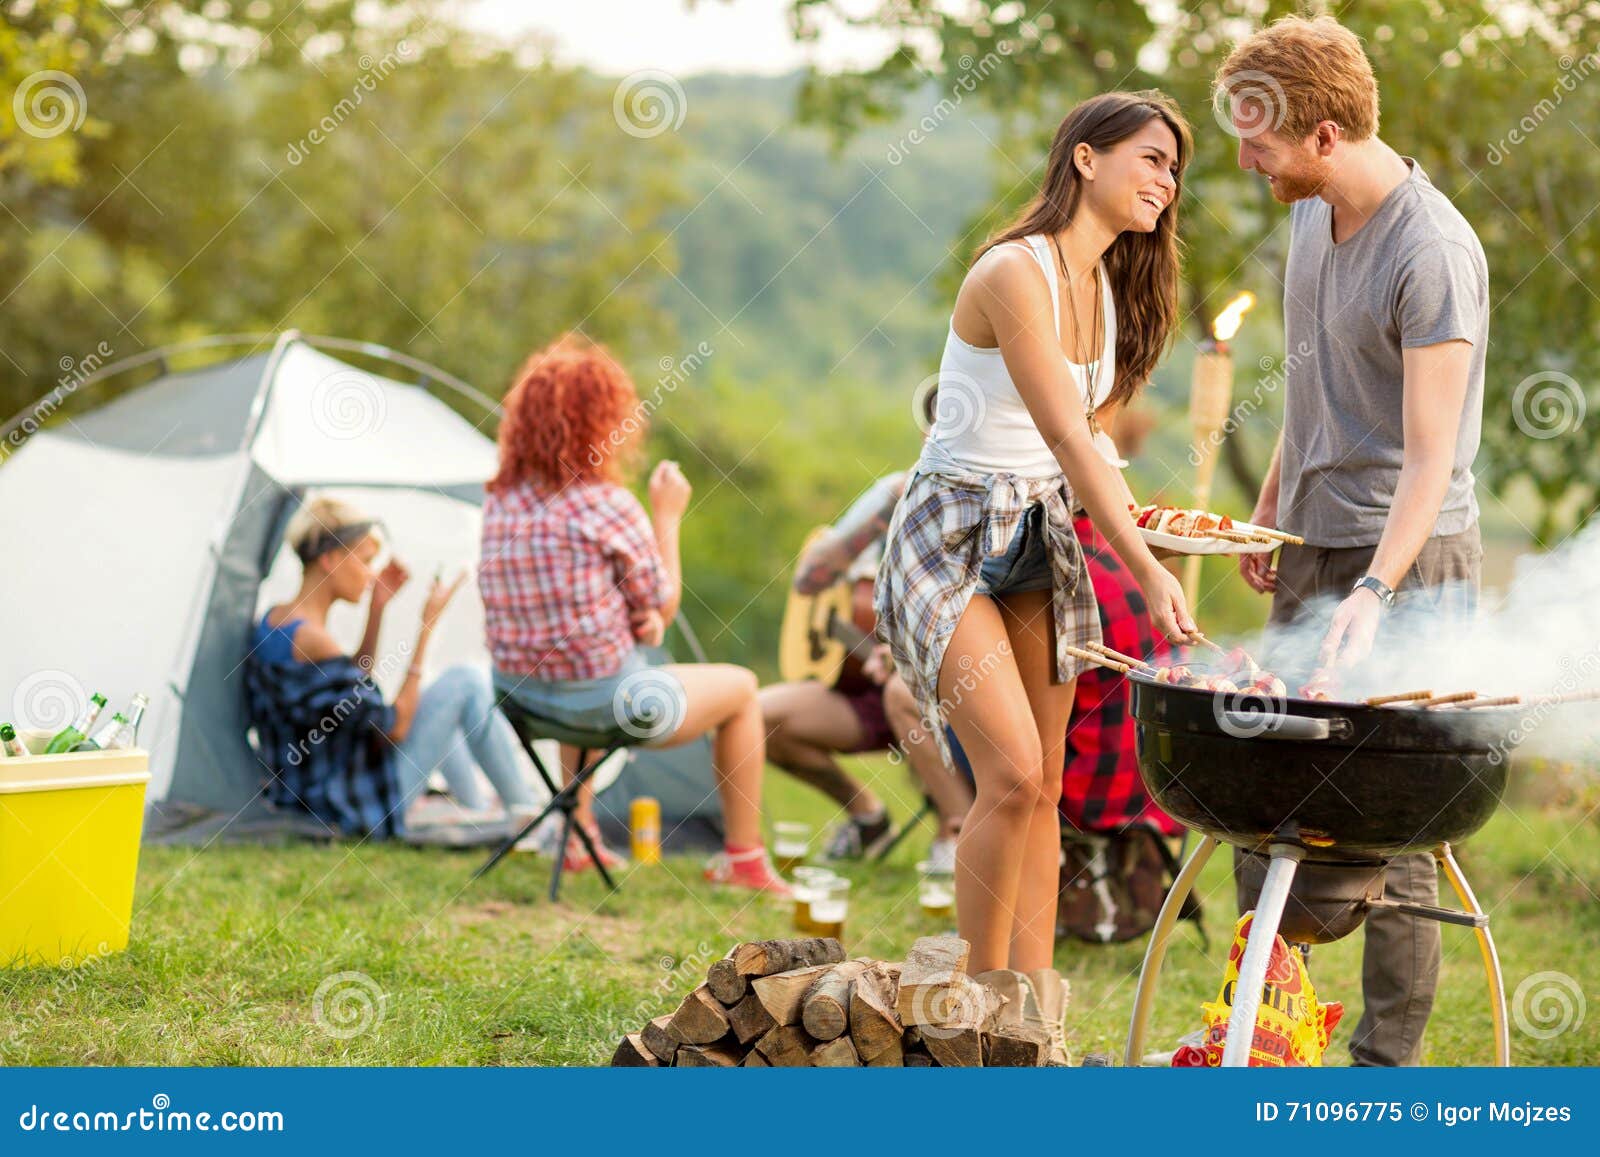 male and female lovingly look each other while baked barbecue